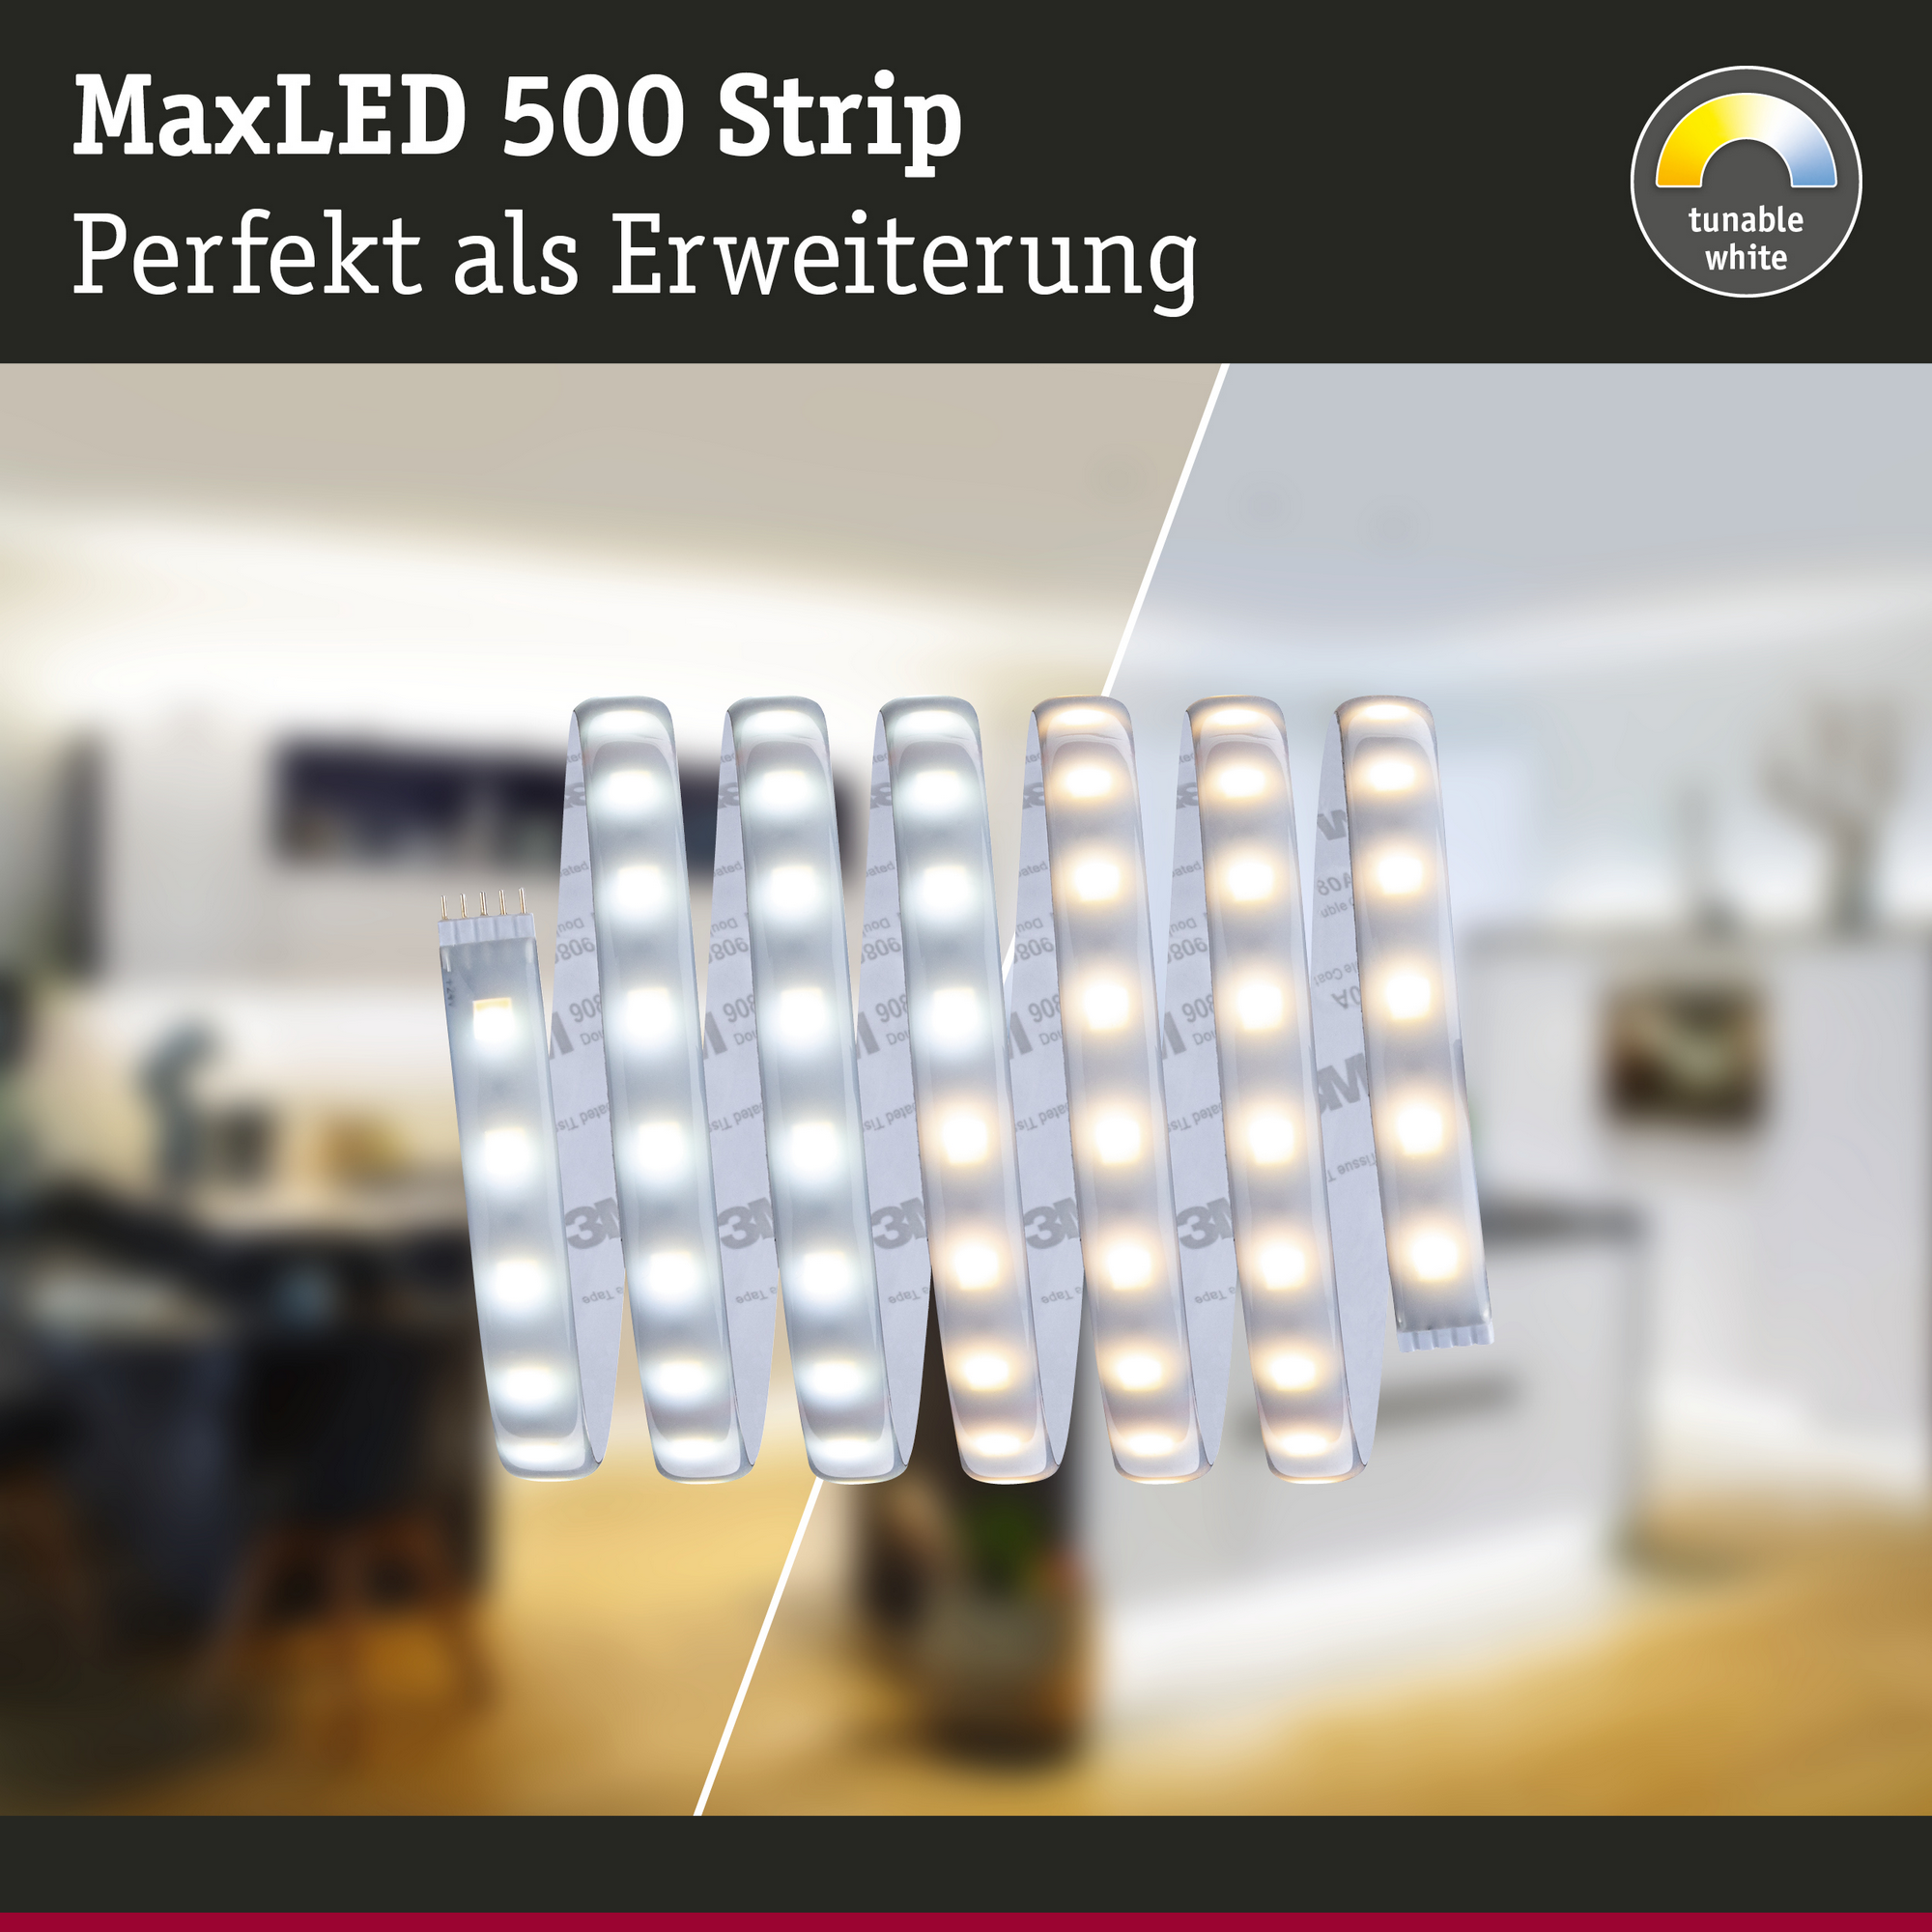 LED-Streifen 'MaxLED 500' 250 cm 16 W 1175 lm 2700-6500 K, Tunable White + product picture